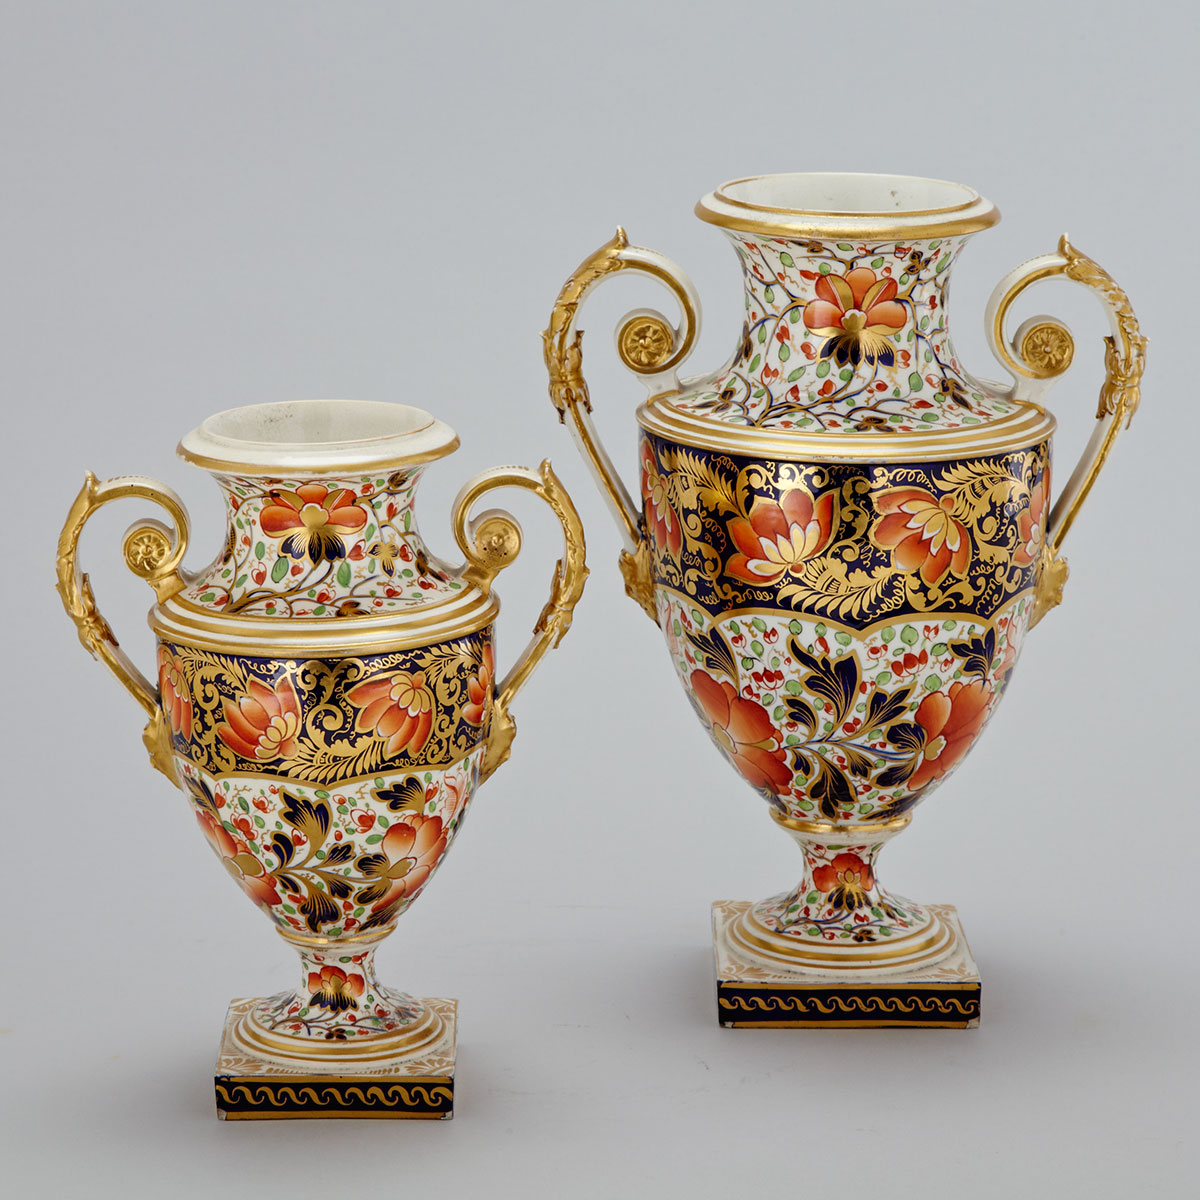 Two Derby Imari Patterned Two-Handled Vases, c.1820